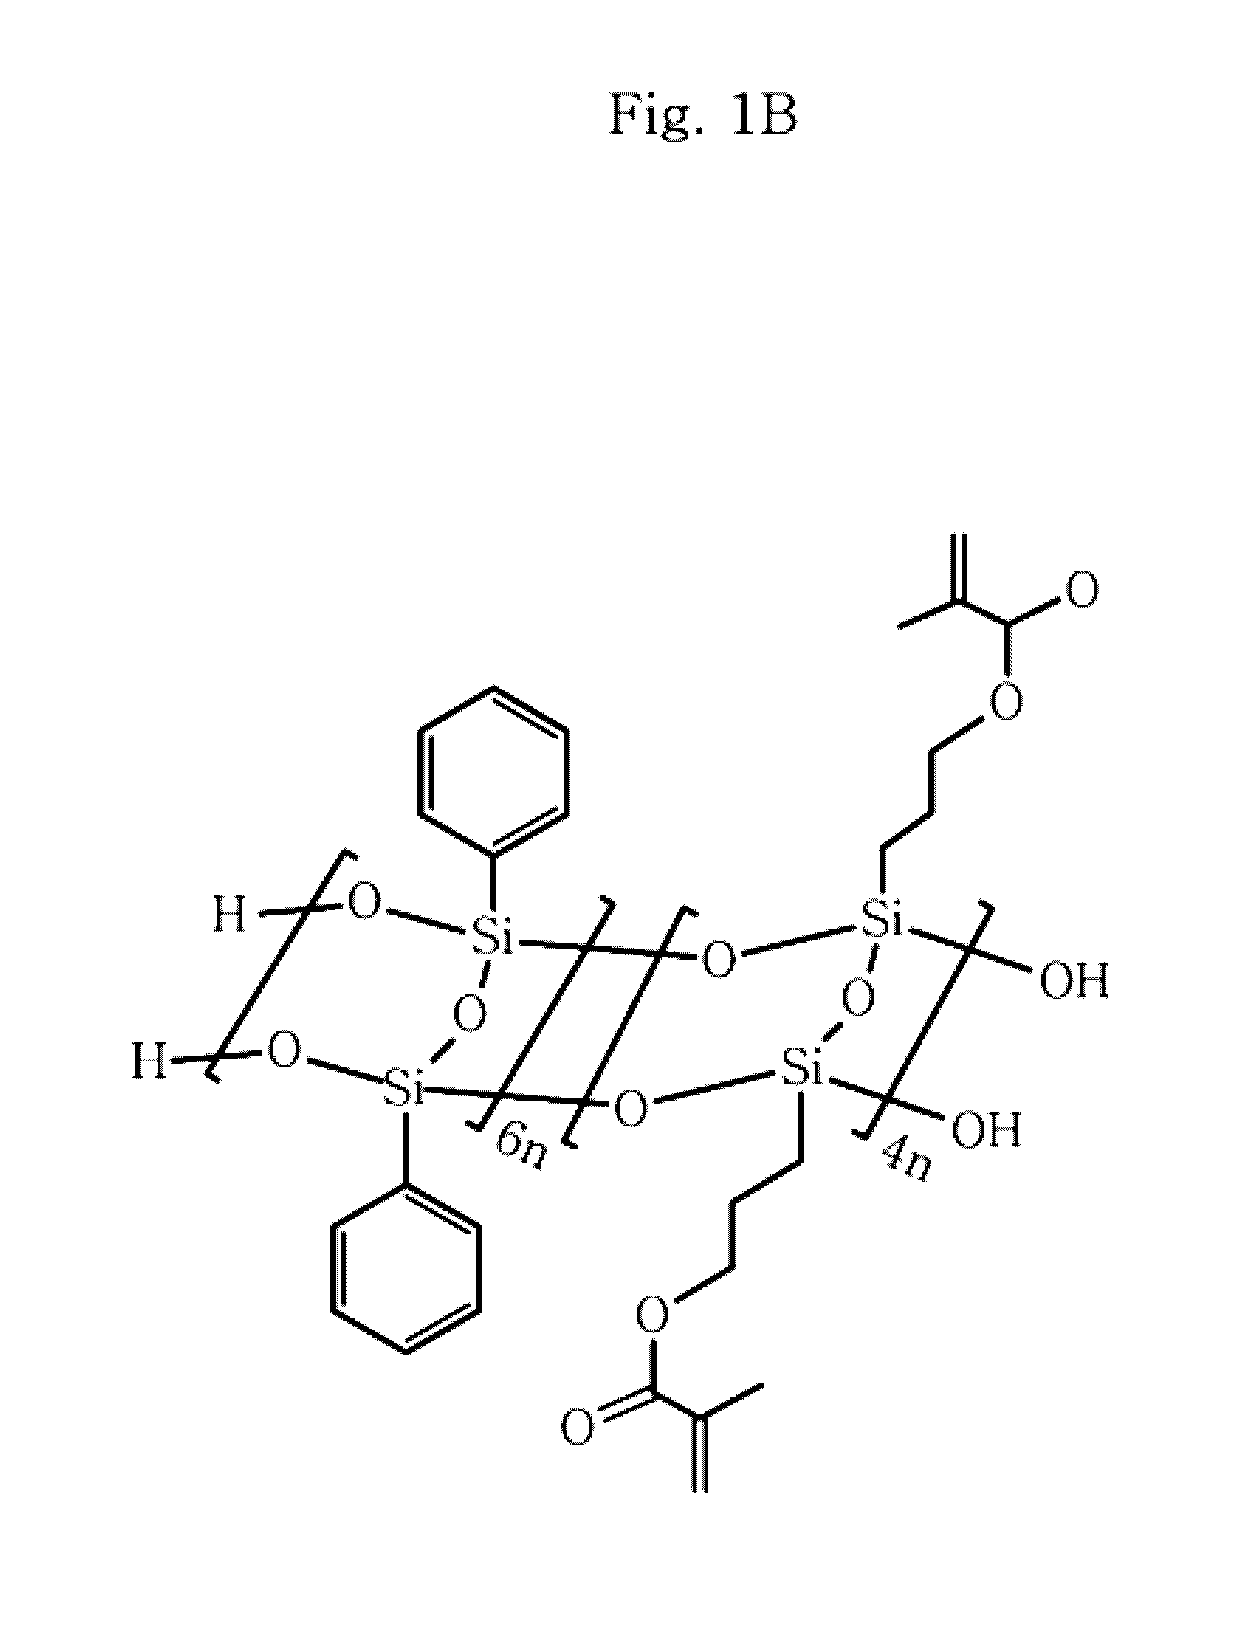 Carbon molecular sieve membranes based on fluorine-containing polymer/polysilsesquioxane blending precursors and method for fabricating the same